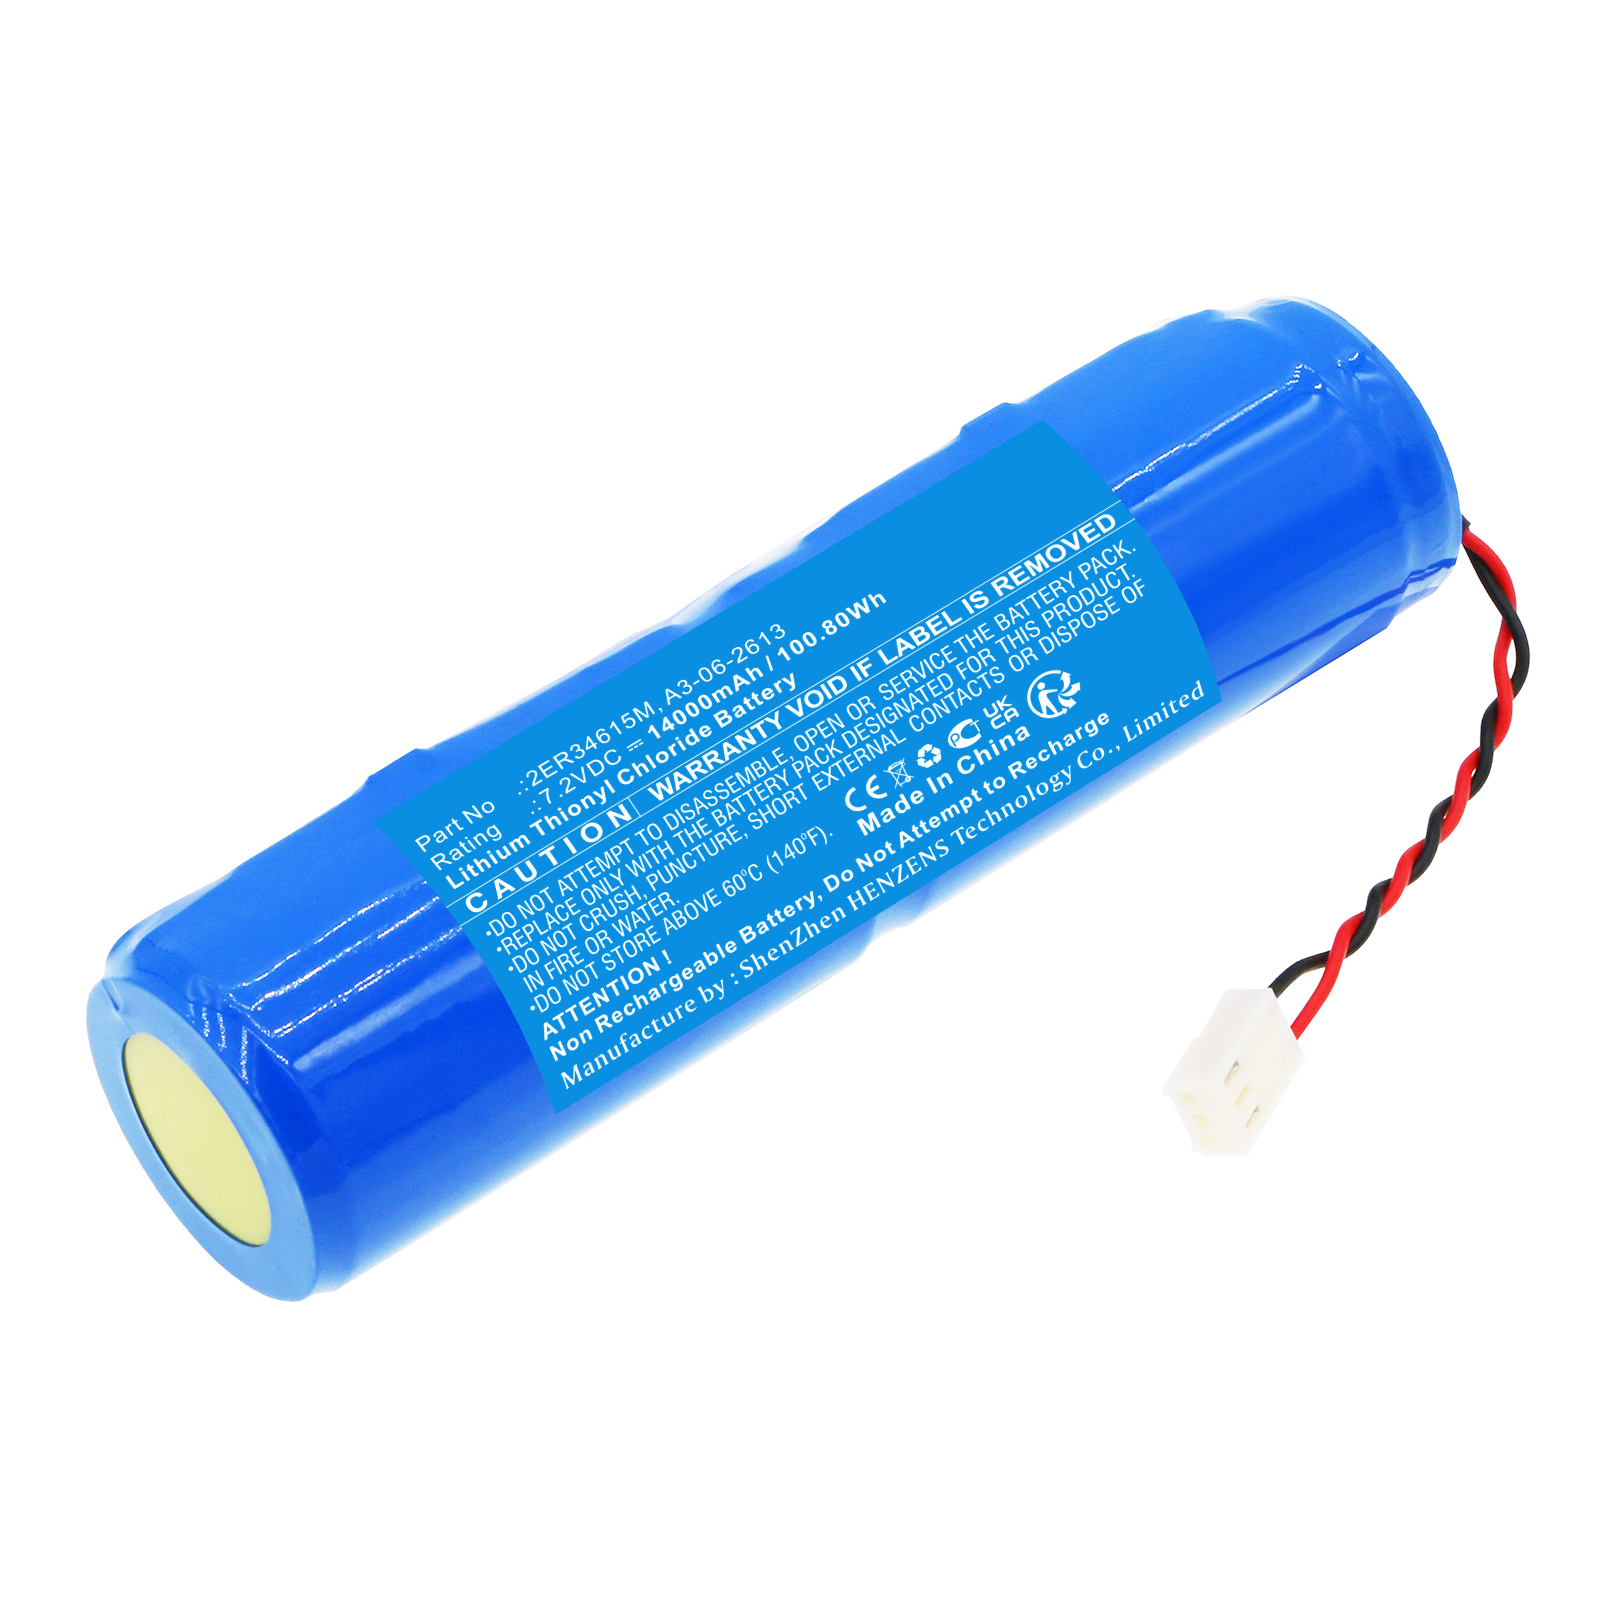 Batteries for Radio BeaconMarine Safety & Flotation Devices